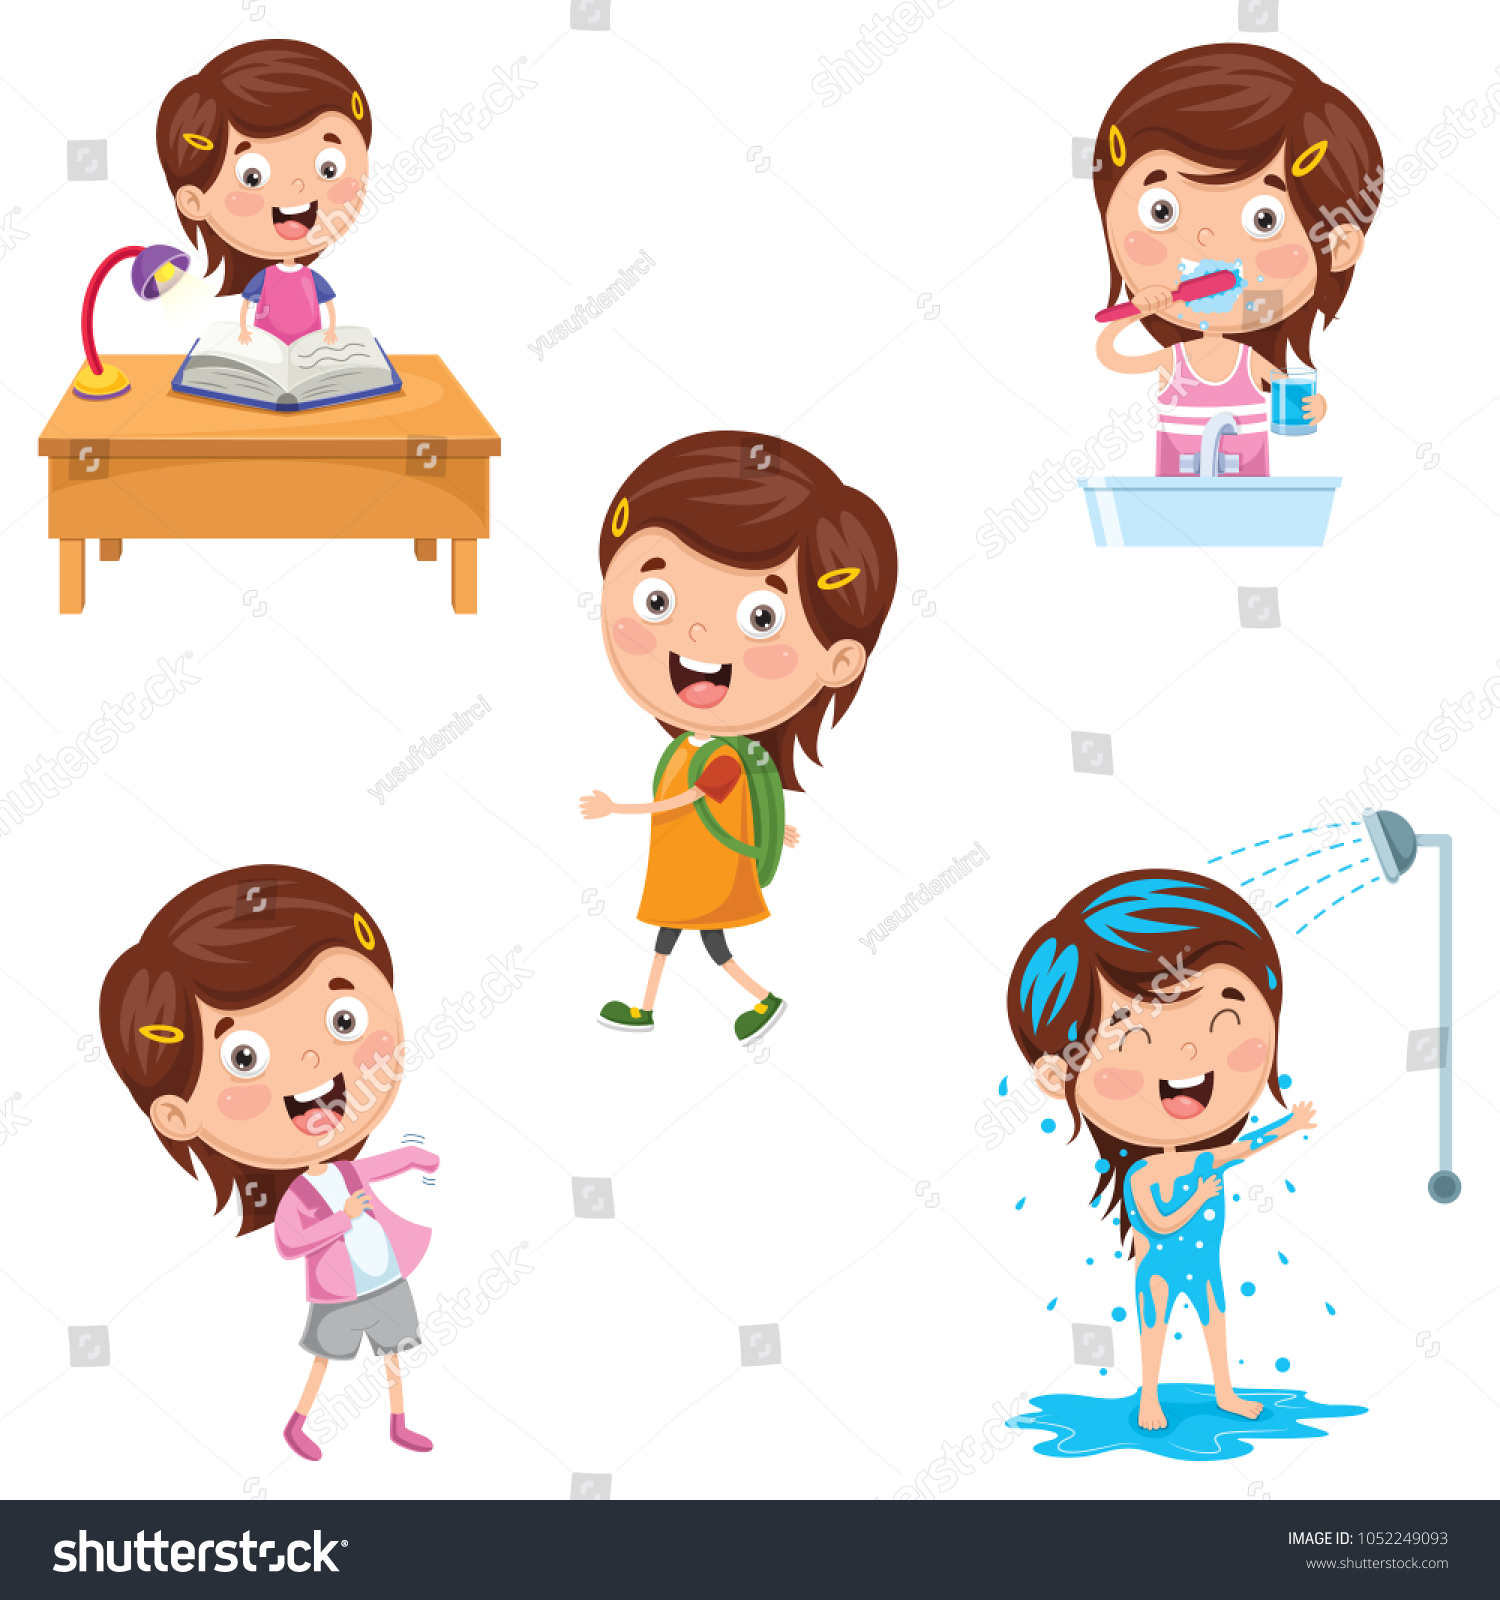 Vector Illustration Kids Daily Routine Activities Stock Vector Royalty